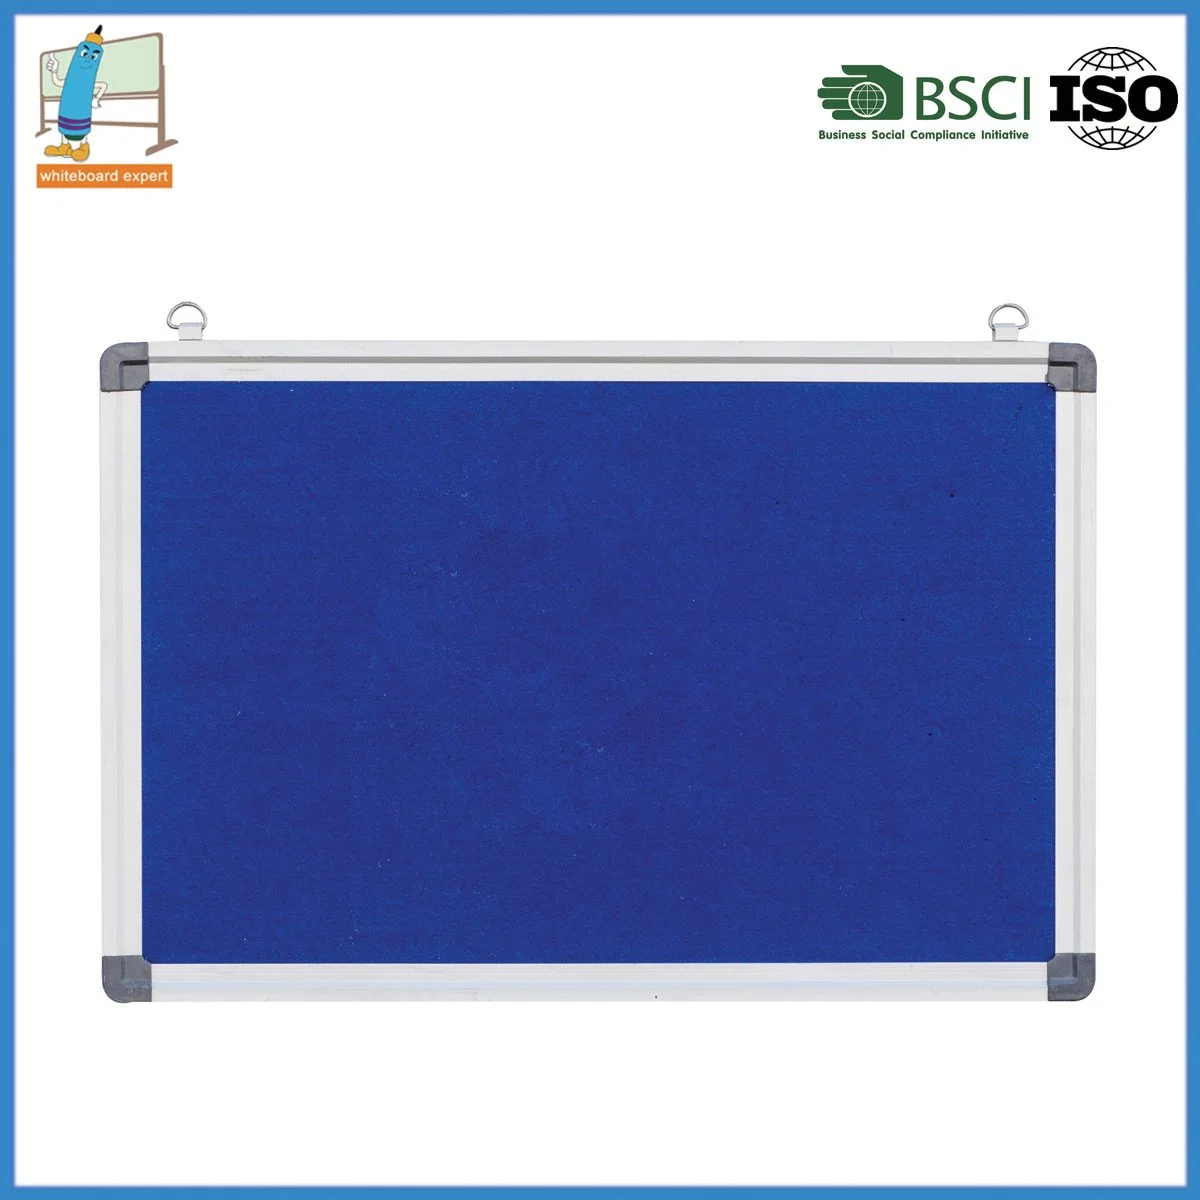 High Quality Aluminum Alloy Frame and Wood Wire Frame Cork Board Office Display Notice Nailing Board